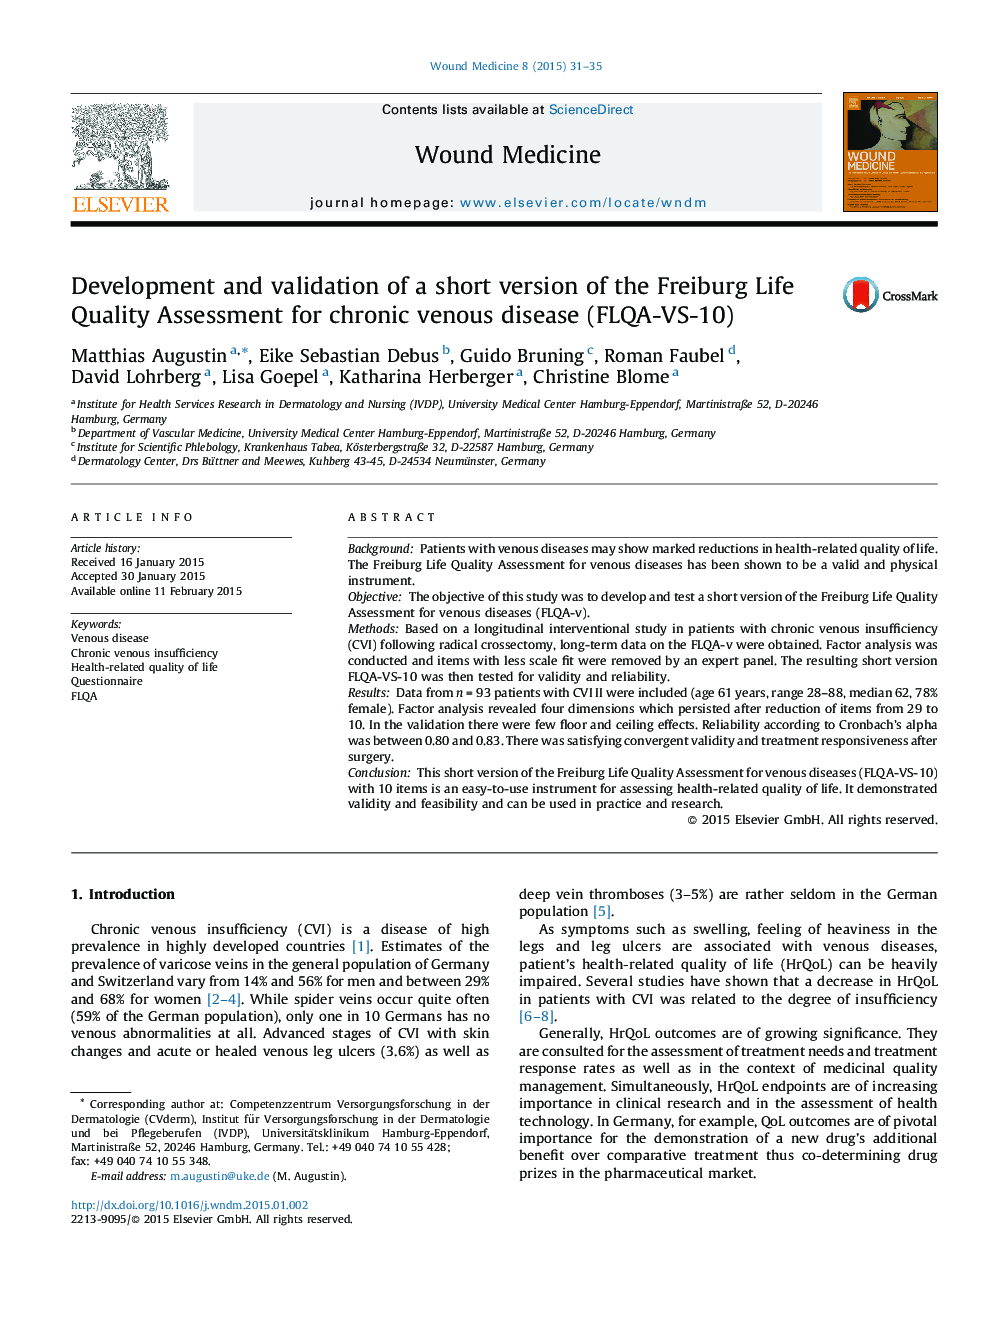 Development and validation of a short version of the Freiburg Life Quality Assessment for chronic venous disease (FLQA-VS-10)